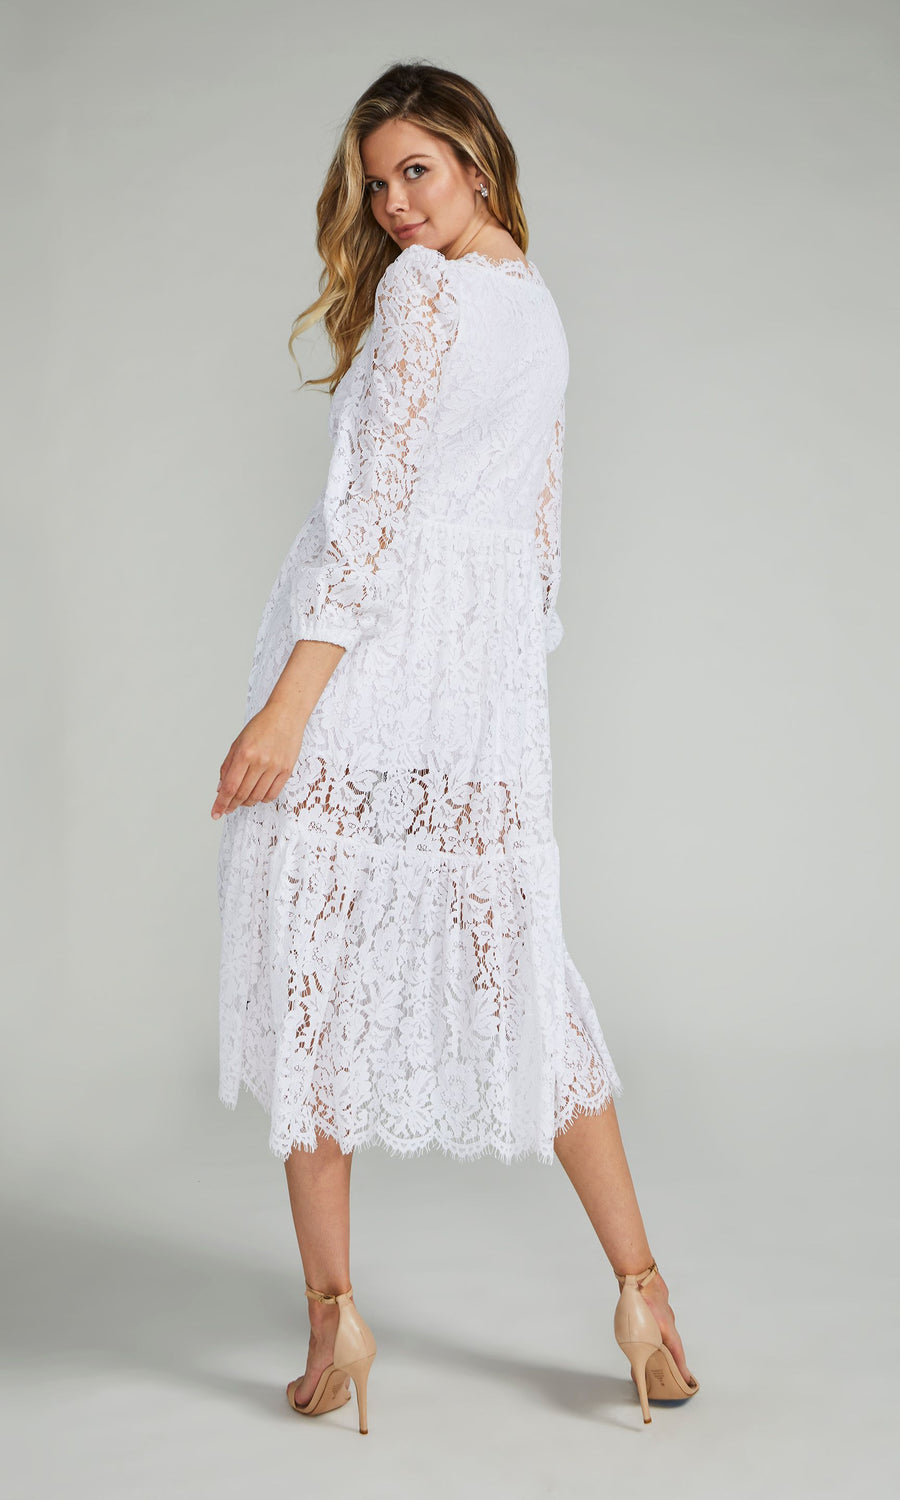 CLZOUD Cute Casual Dresses For Women White Lace New Elegant, 47% OFF